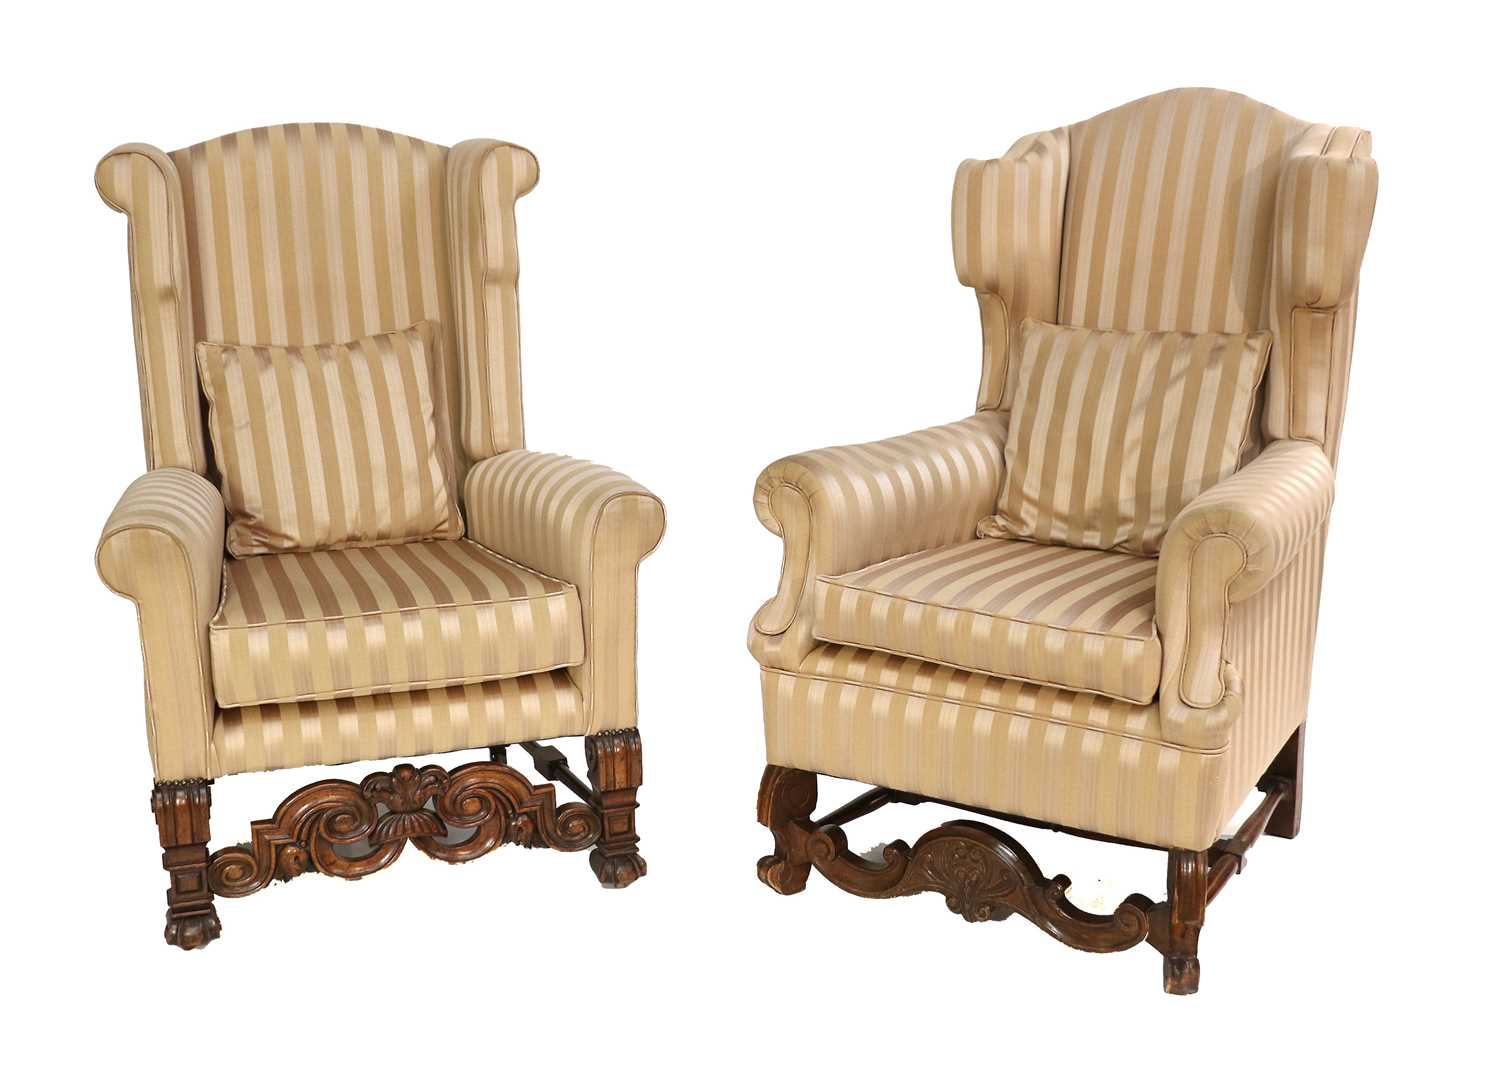 A Pair of William & Mary-Style Walnut Armchairs, early 20th century, recovered in beige and gold